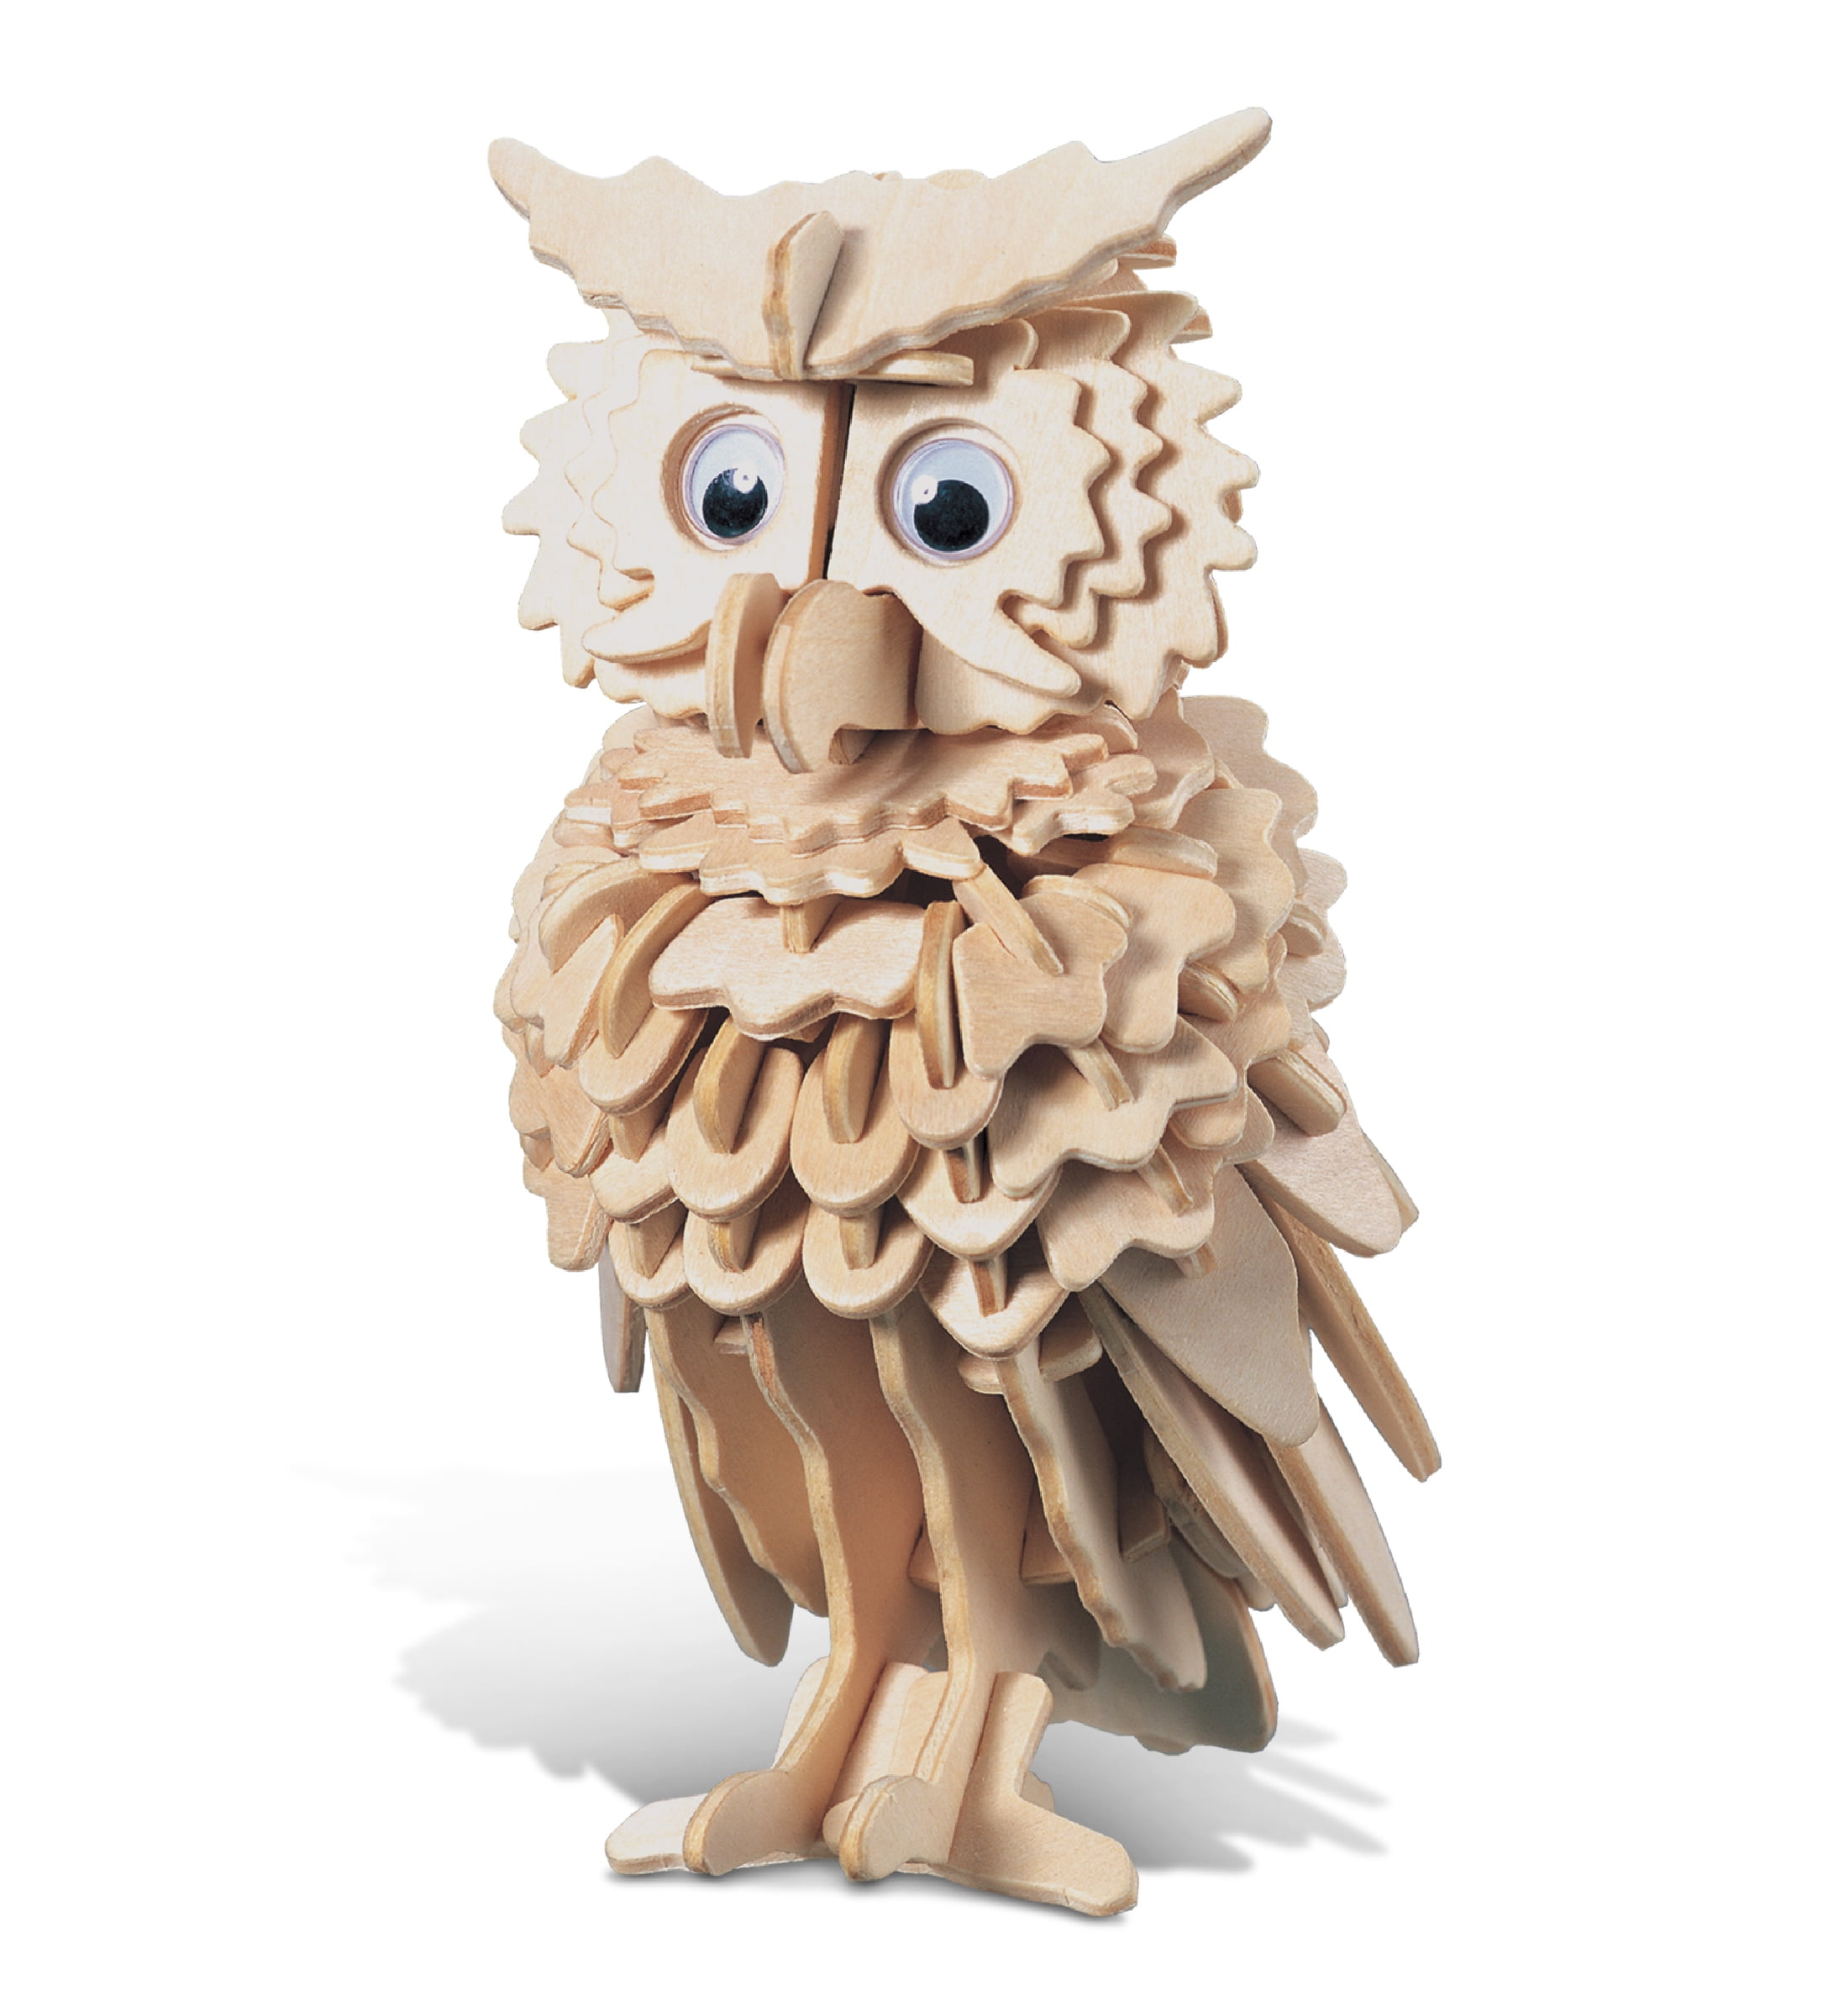 3D Wooden Owl DIY Puzzle Jigsaw Woodcraft Kids Educational Crafts Kit Toys Model 